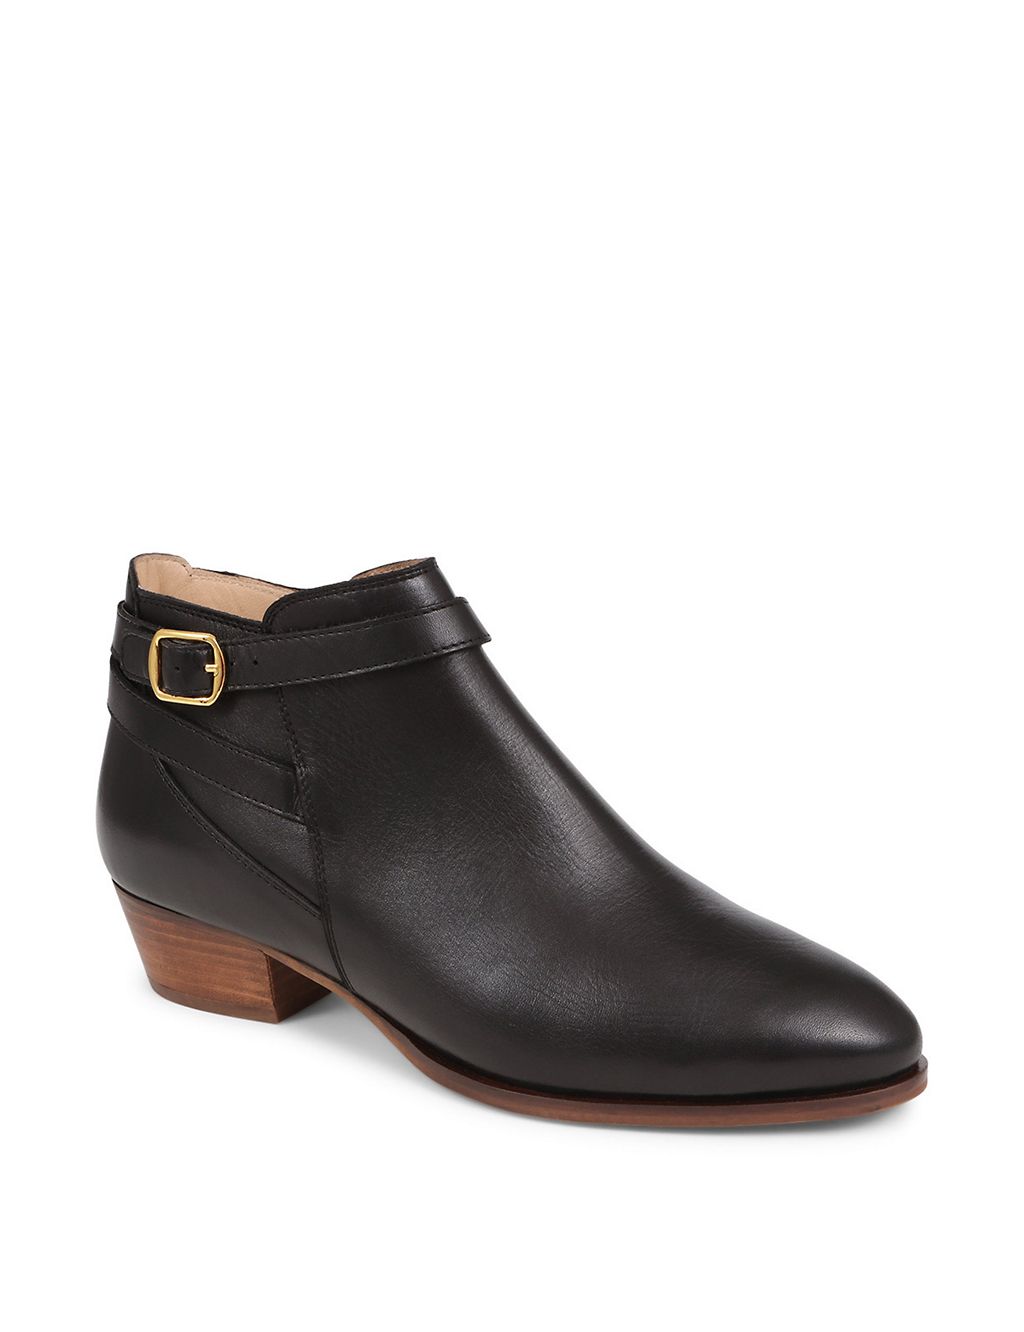 Leather Block Heel Ankle Boots 1 of 6